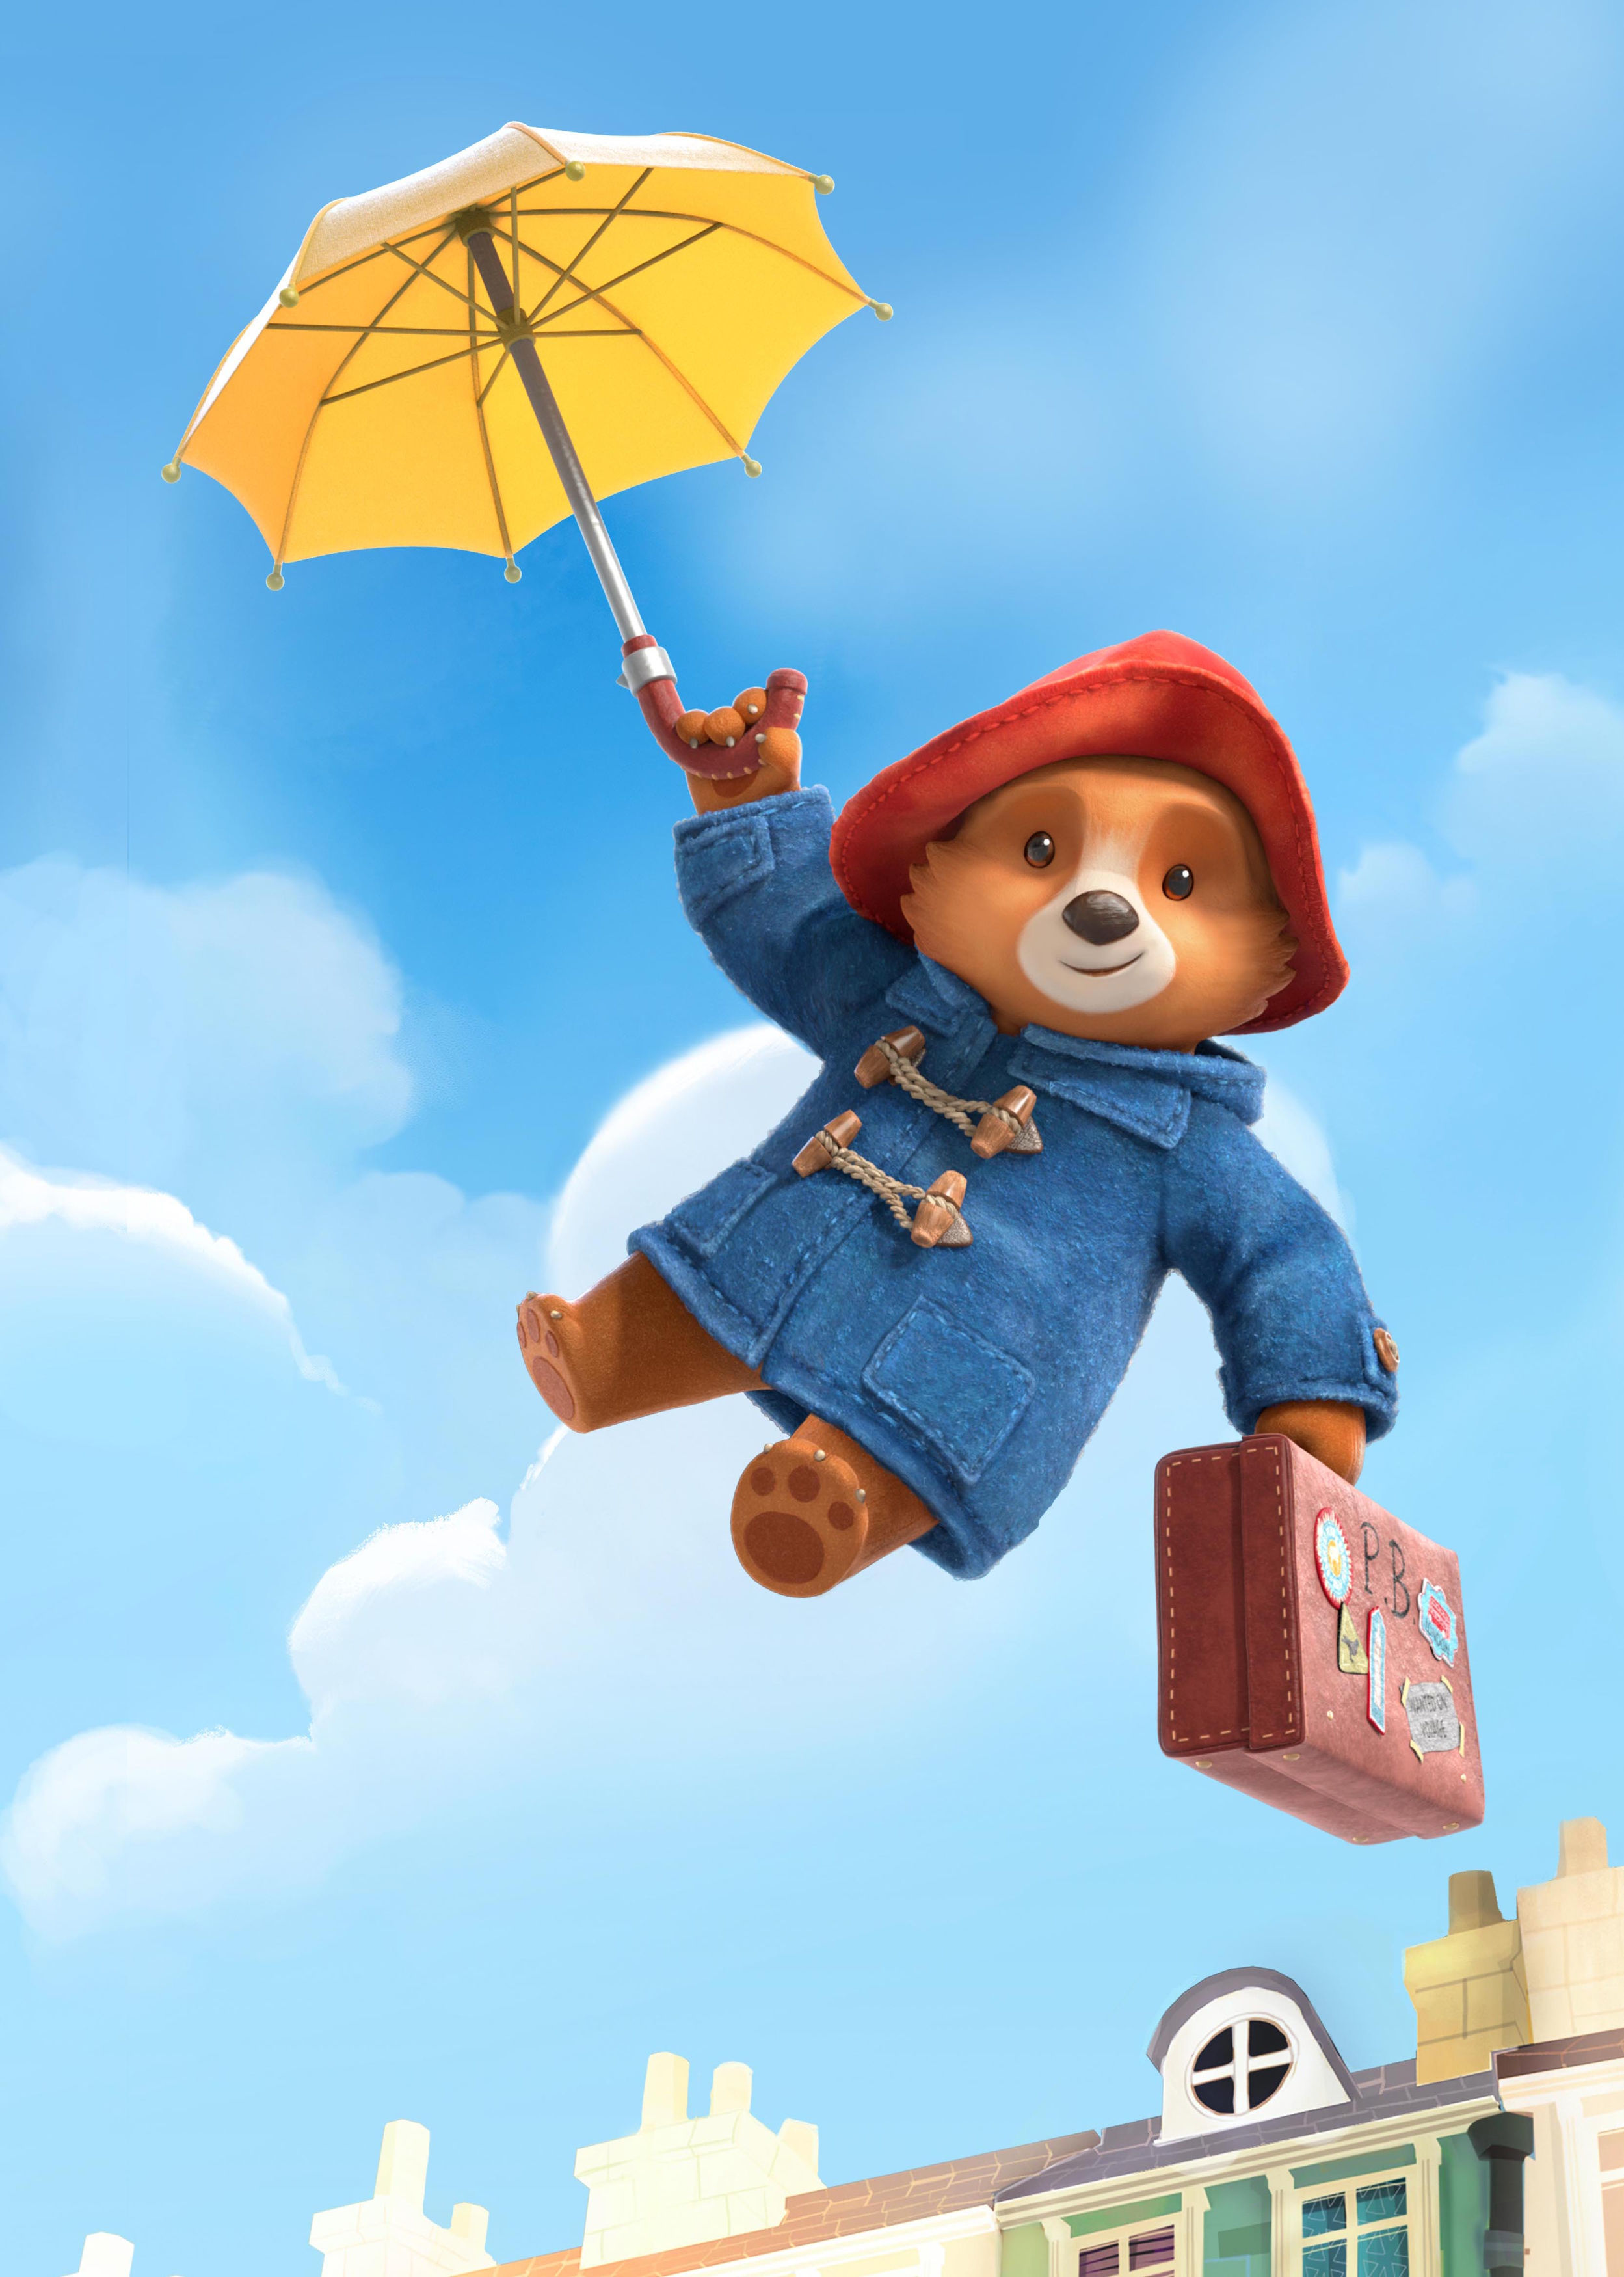 The Paddington Bear range is now available to buy